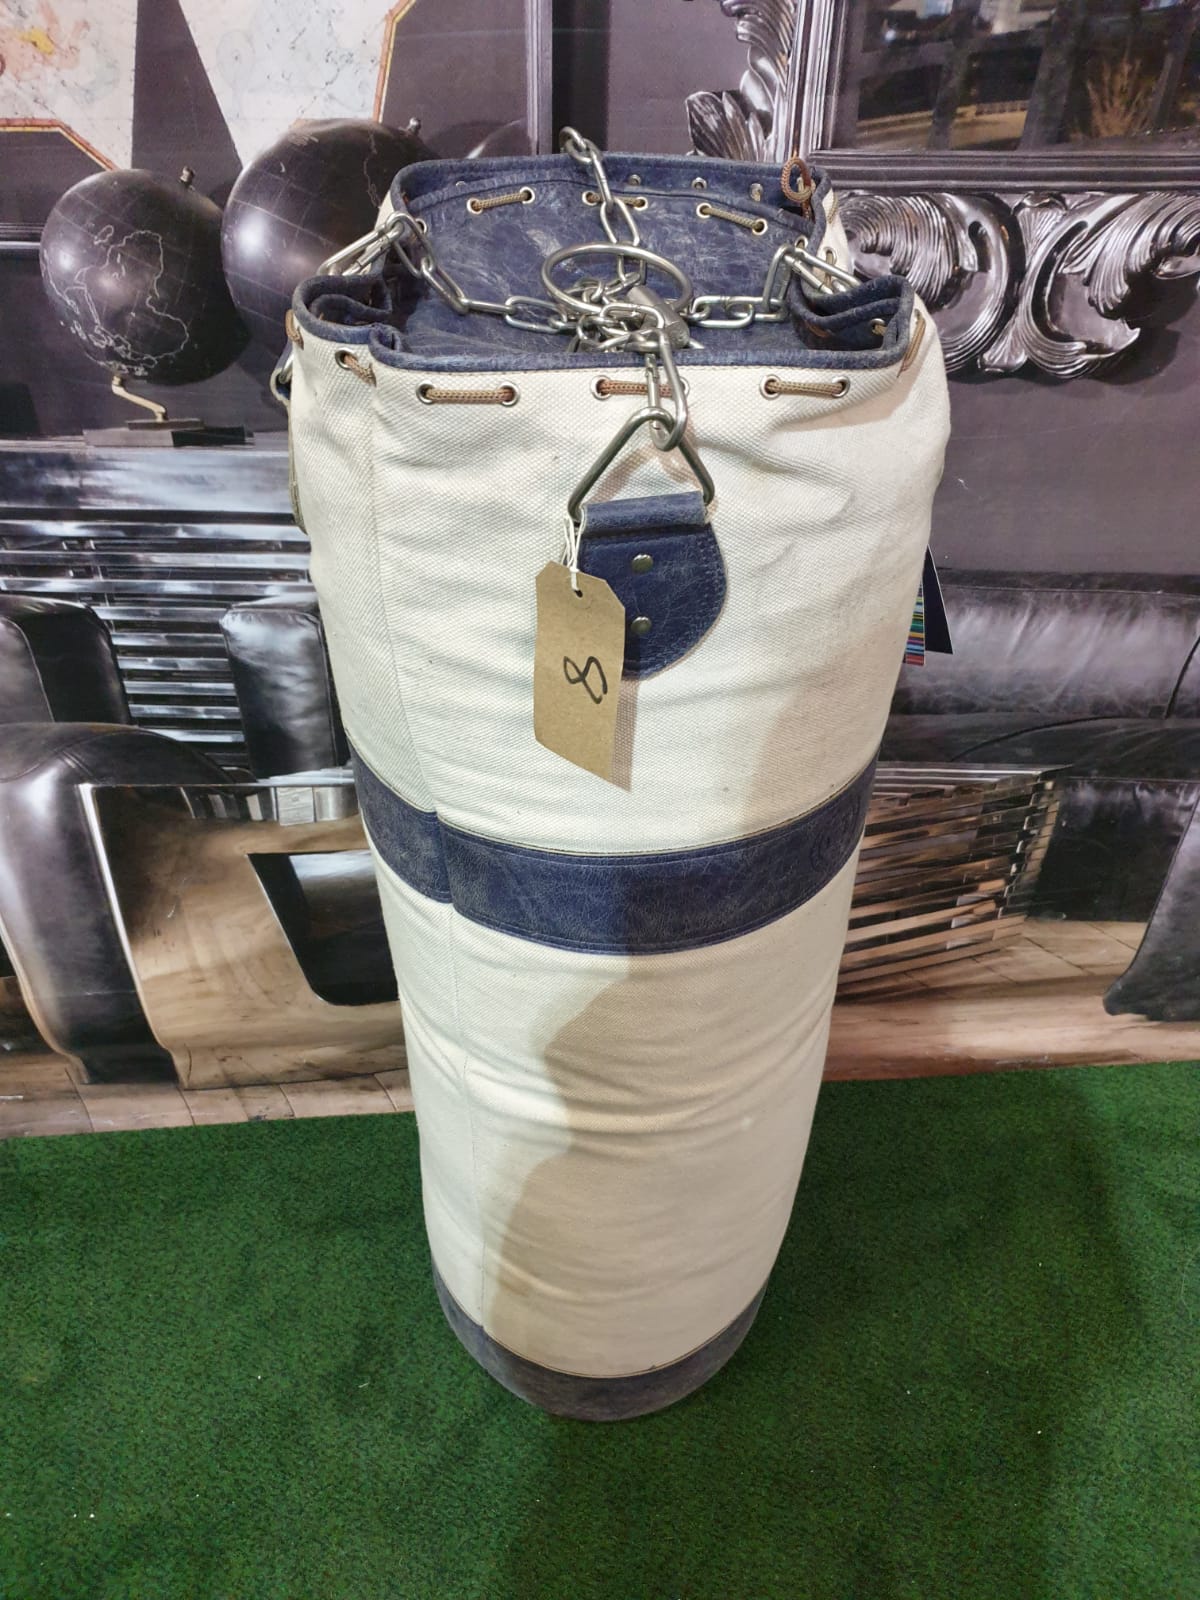 Timothy Oulton Boxing Punch Bag Add some style to your gym or training area or even as a - Image 2 of 4